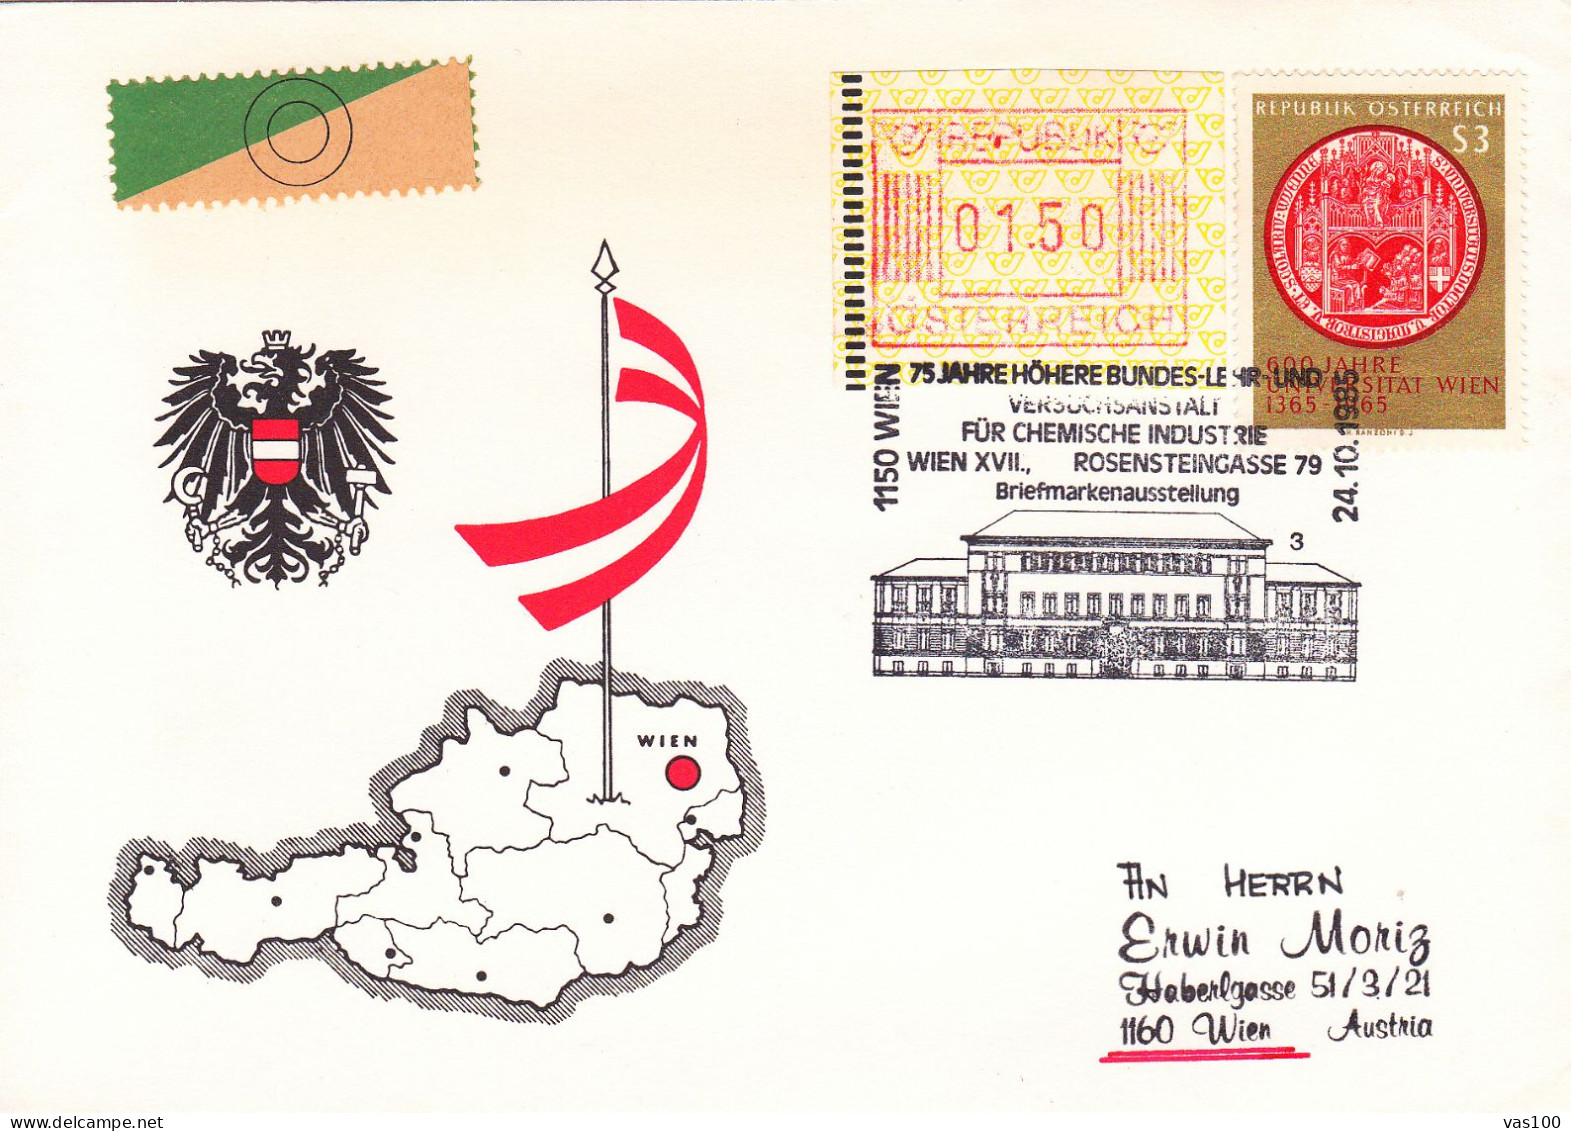 AUSTRIA POSTAL HISTORY / CHEMISCHE INDUSTRIE, 24.10.1985 - Covers & Documents